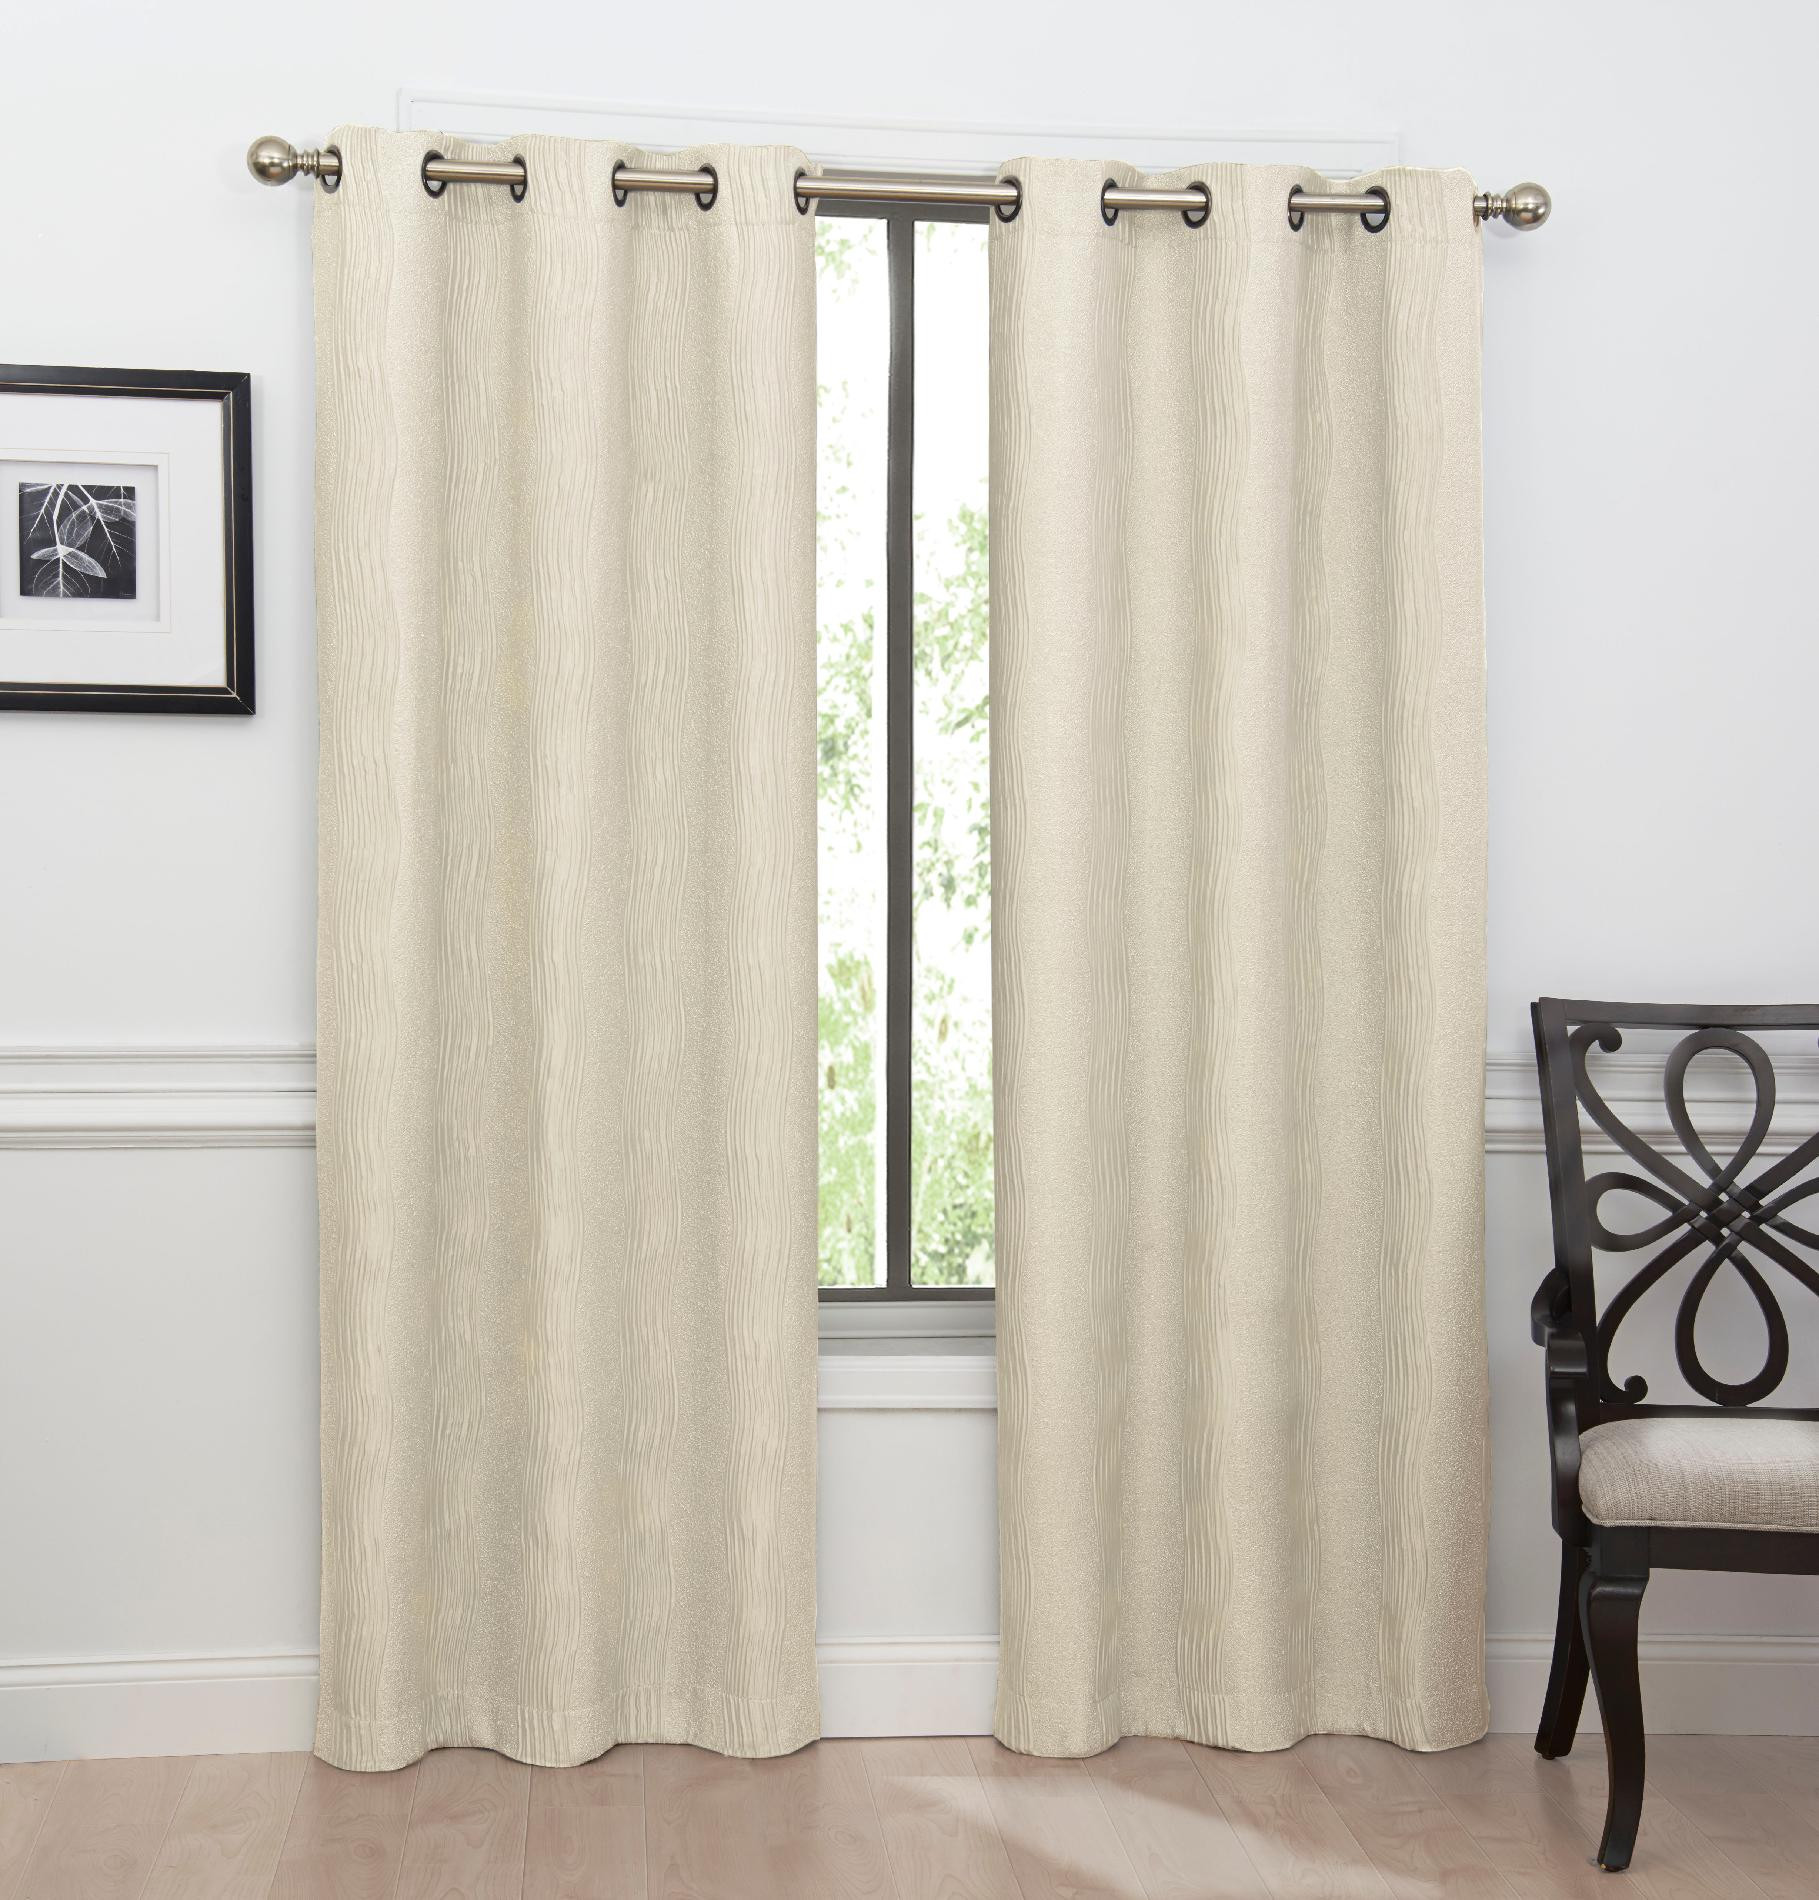 Sears Curtains For Living Room
 Colormate Room Darkening "Marquis" Grommet Top Window Panel